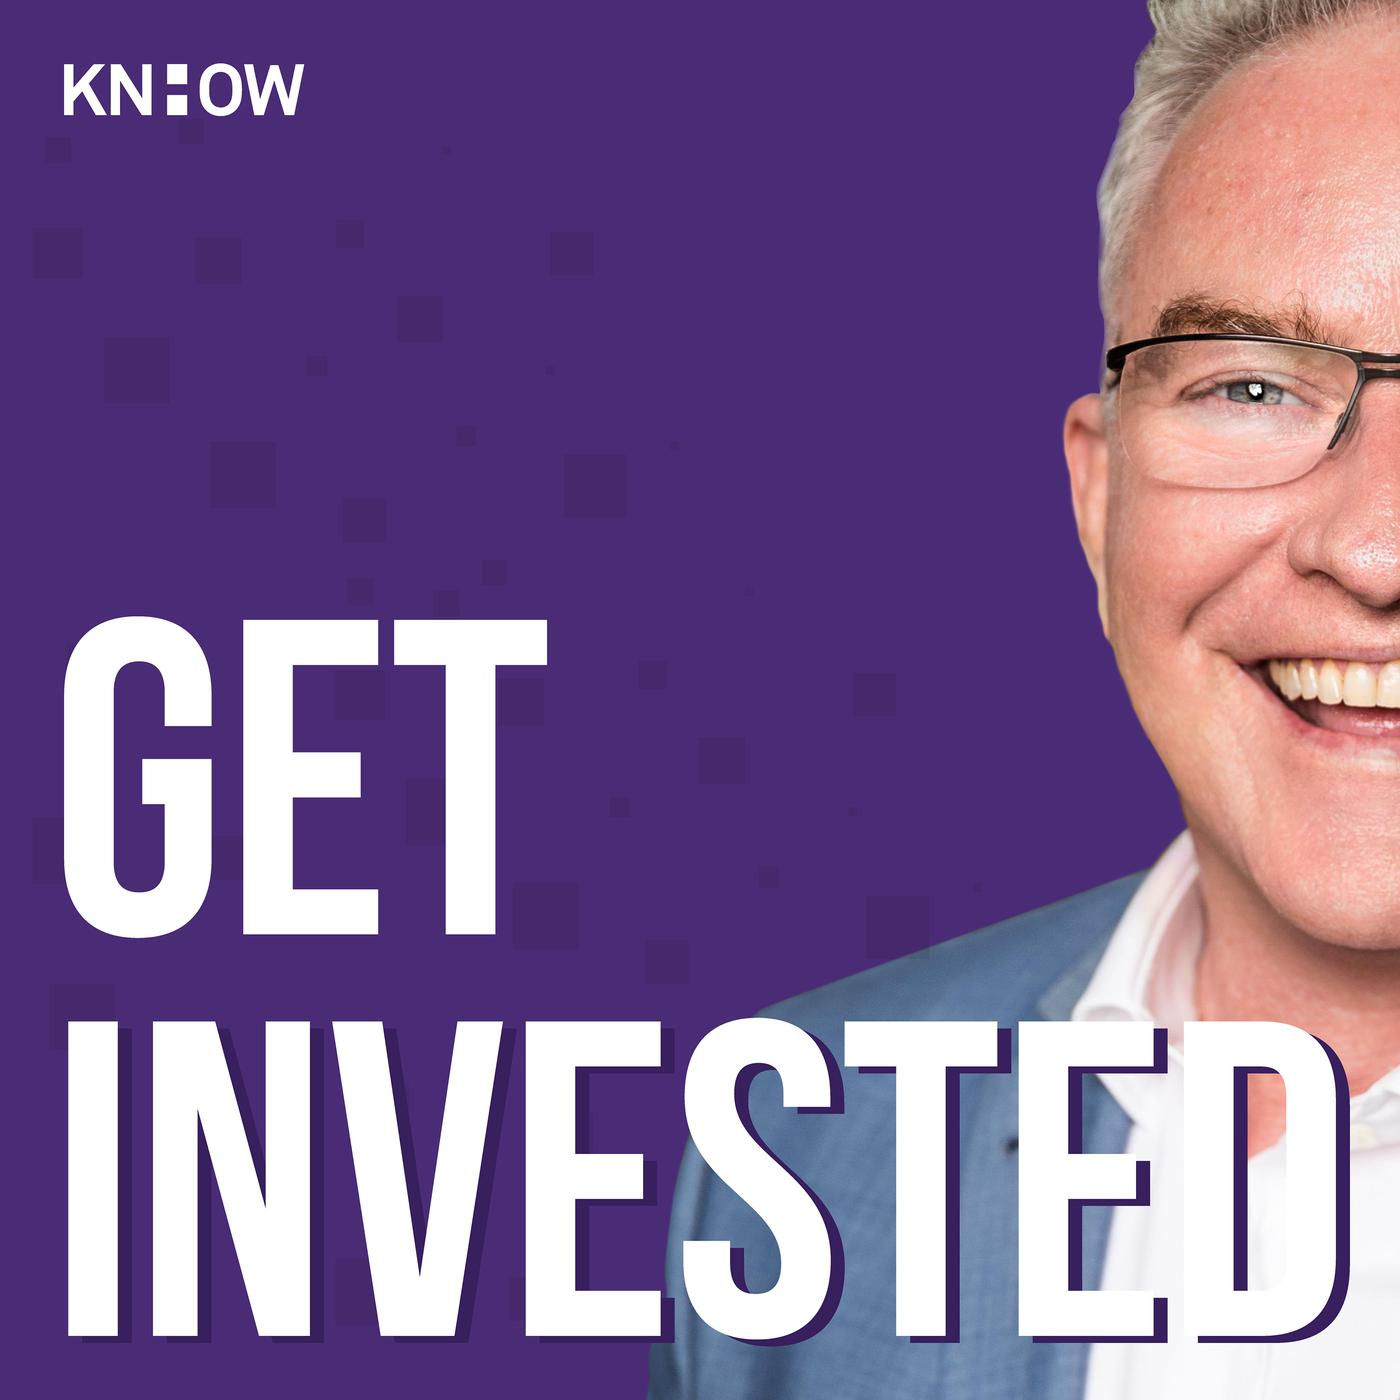 Get Invested: Part 1 - Dr Cameron Murray on property & fresh economic thinking